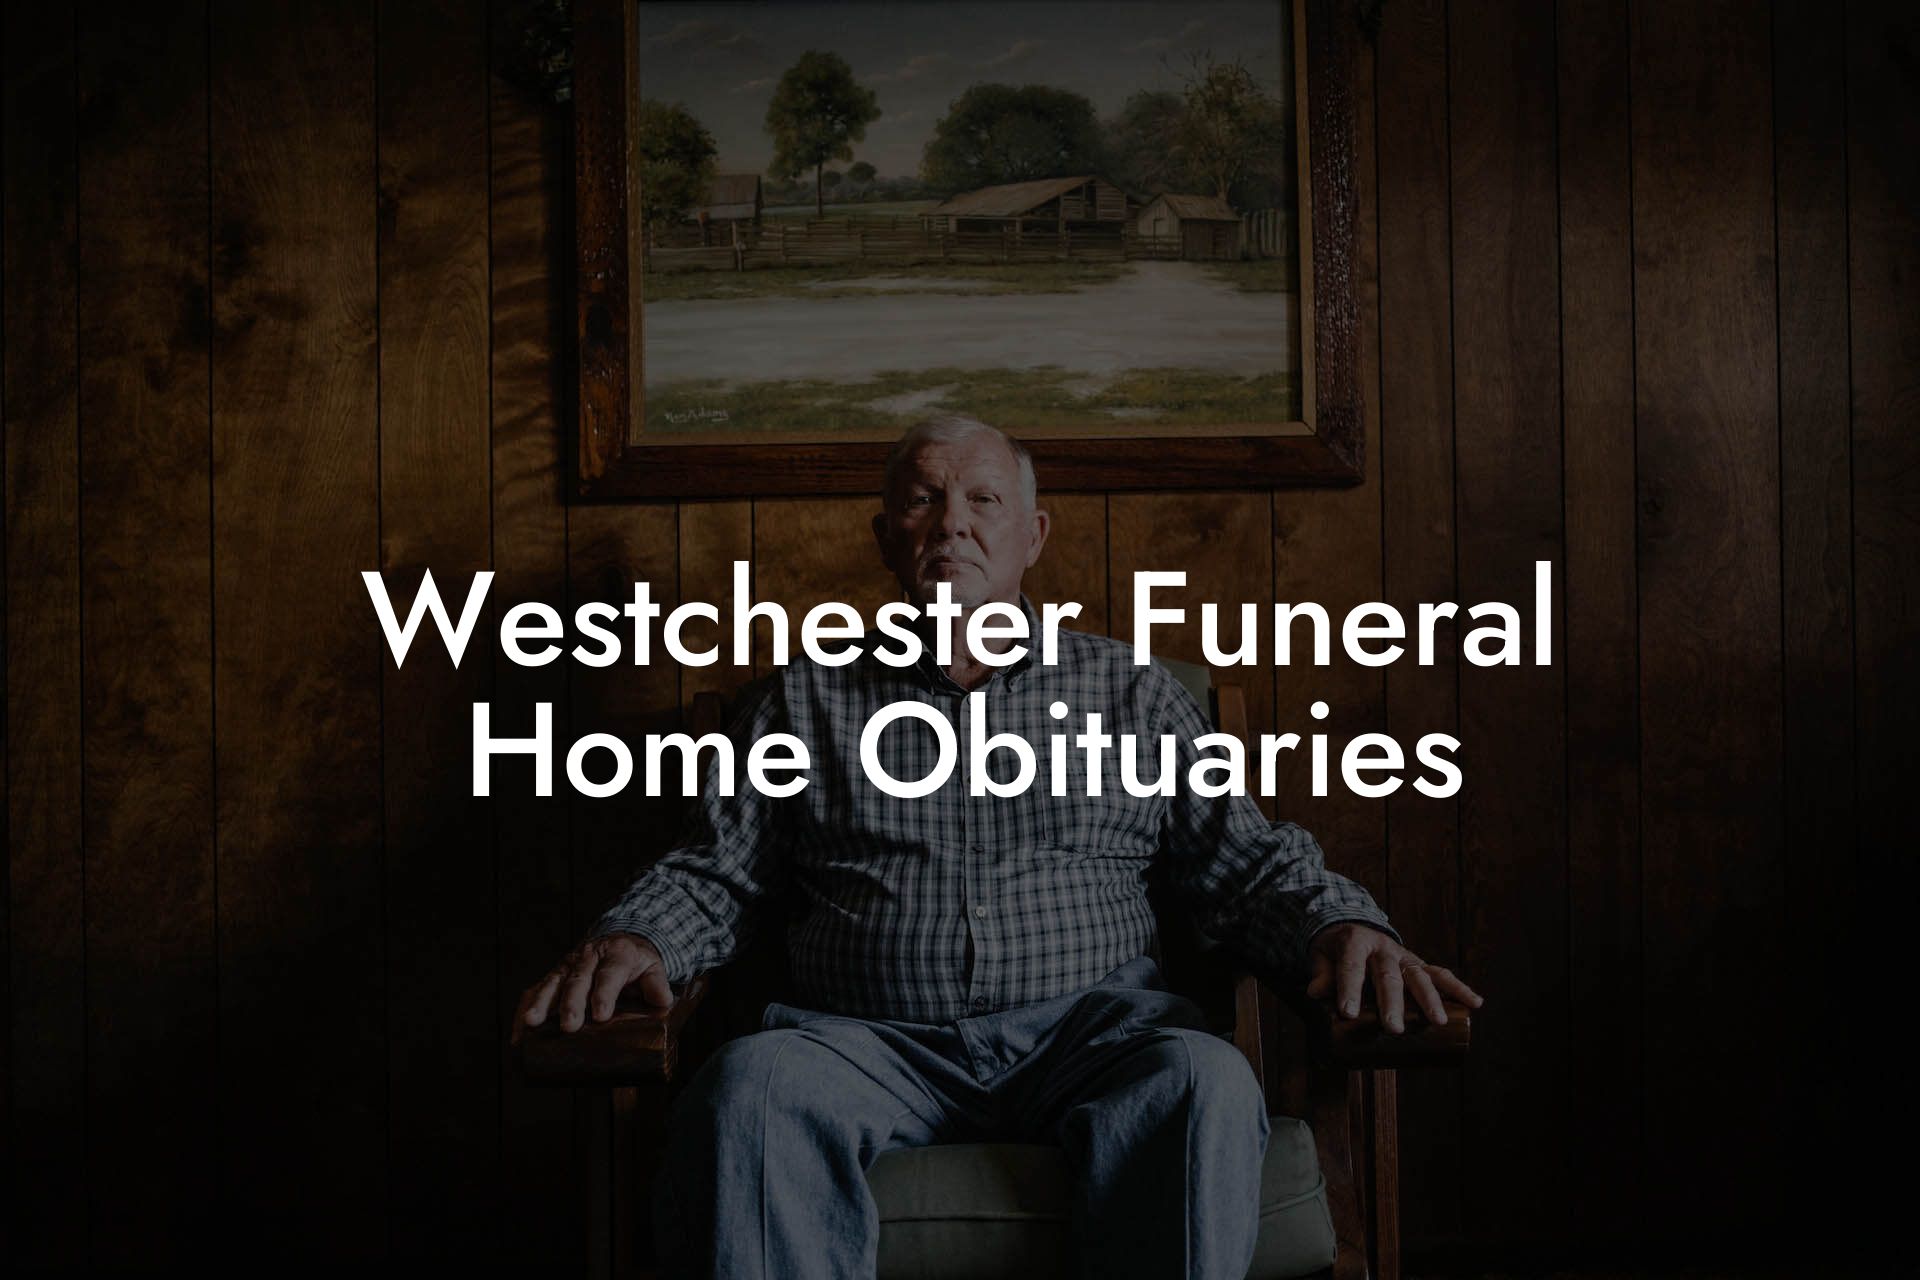 Westchester Funeral Home Obituaries